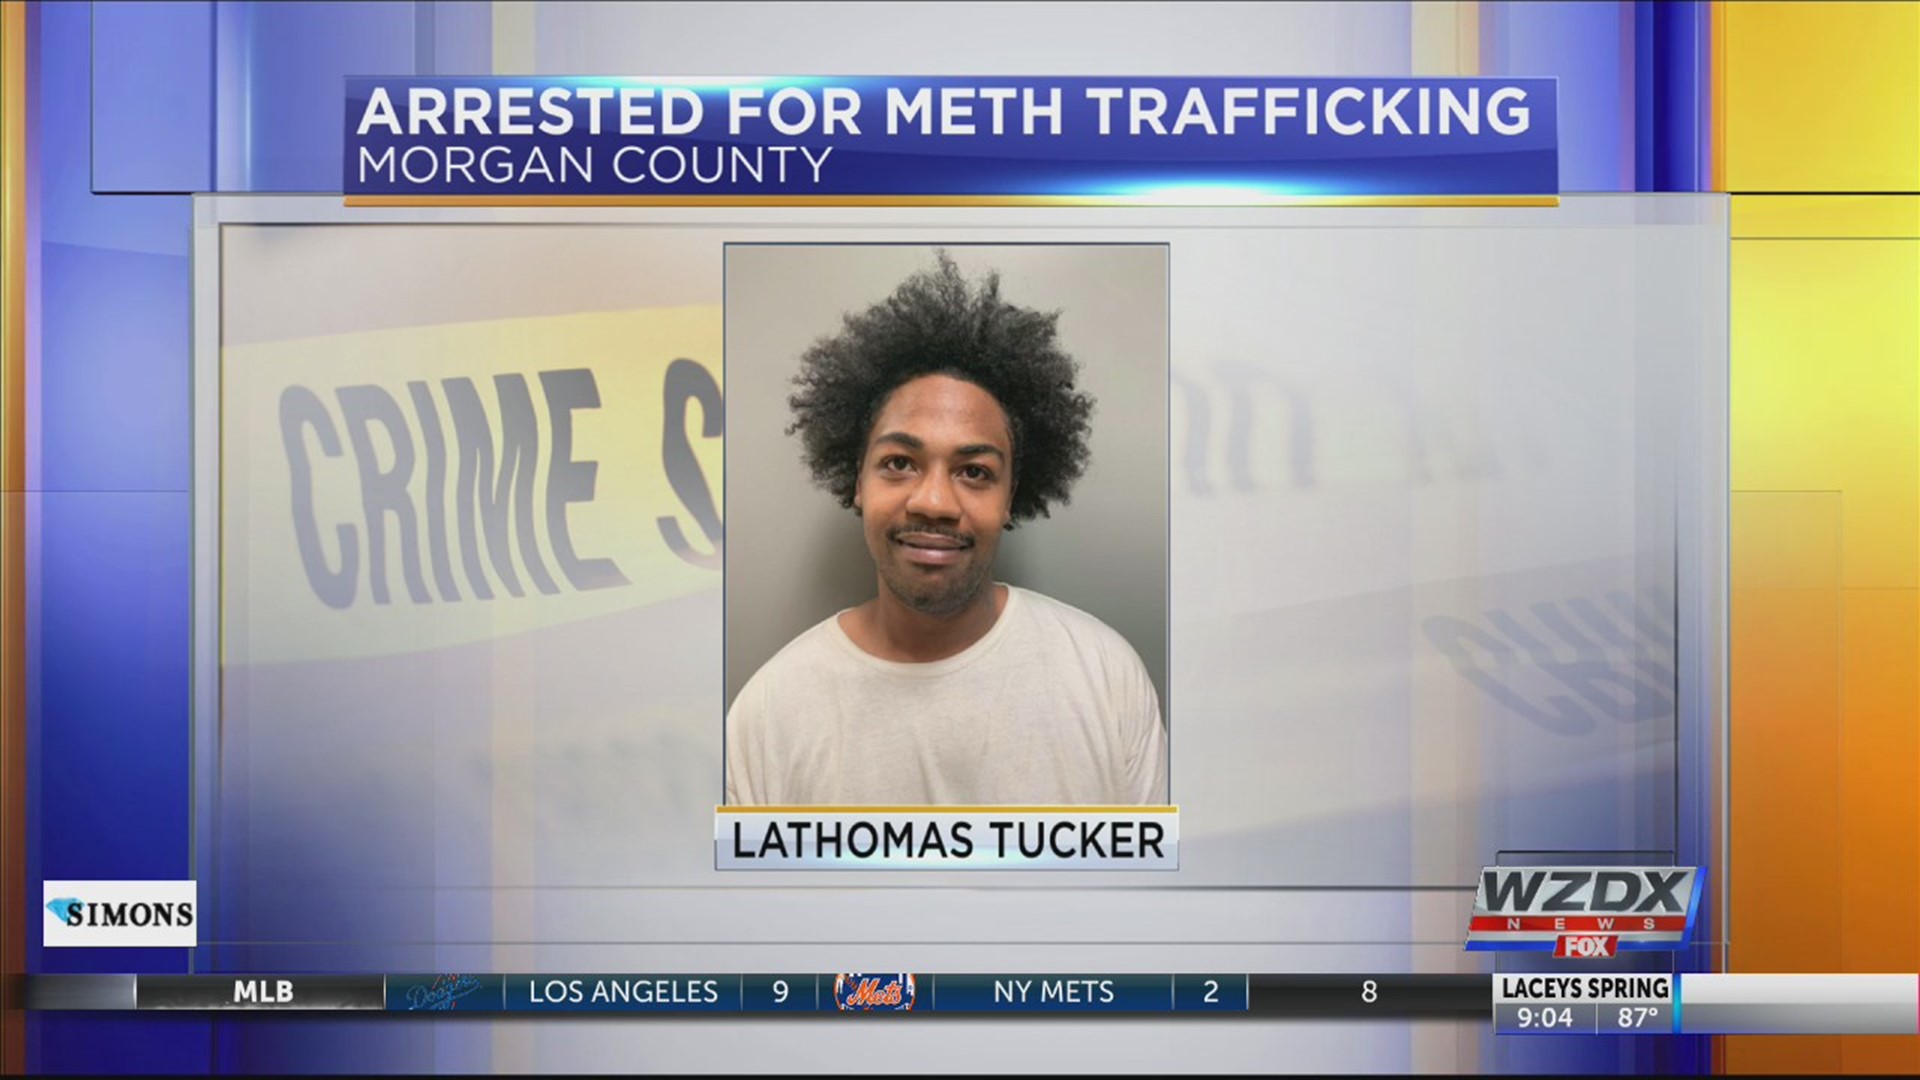 A man was arrested after authorities found over 3 pounds of meth.